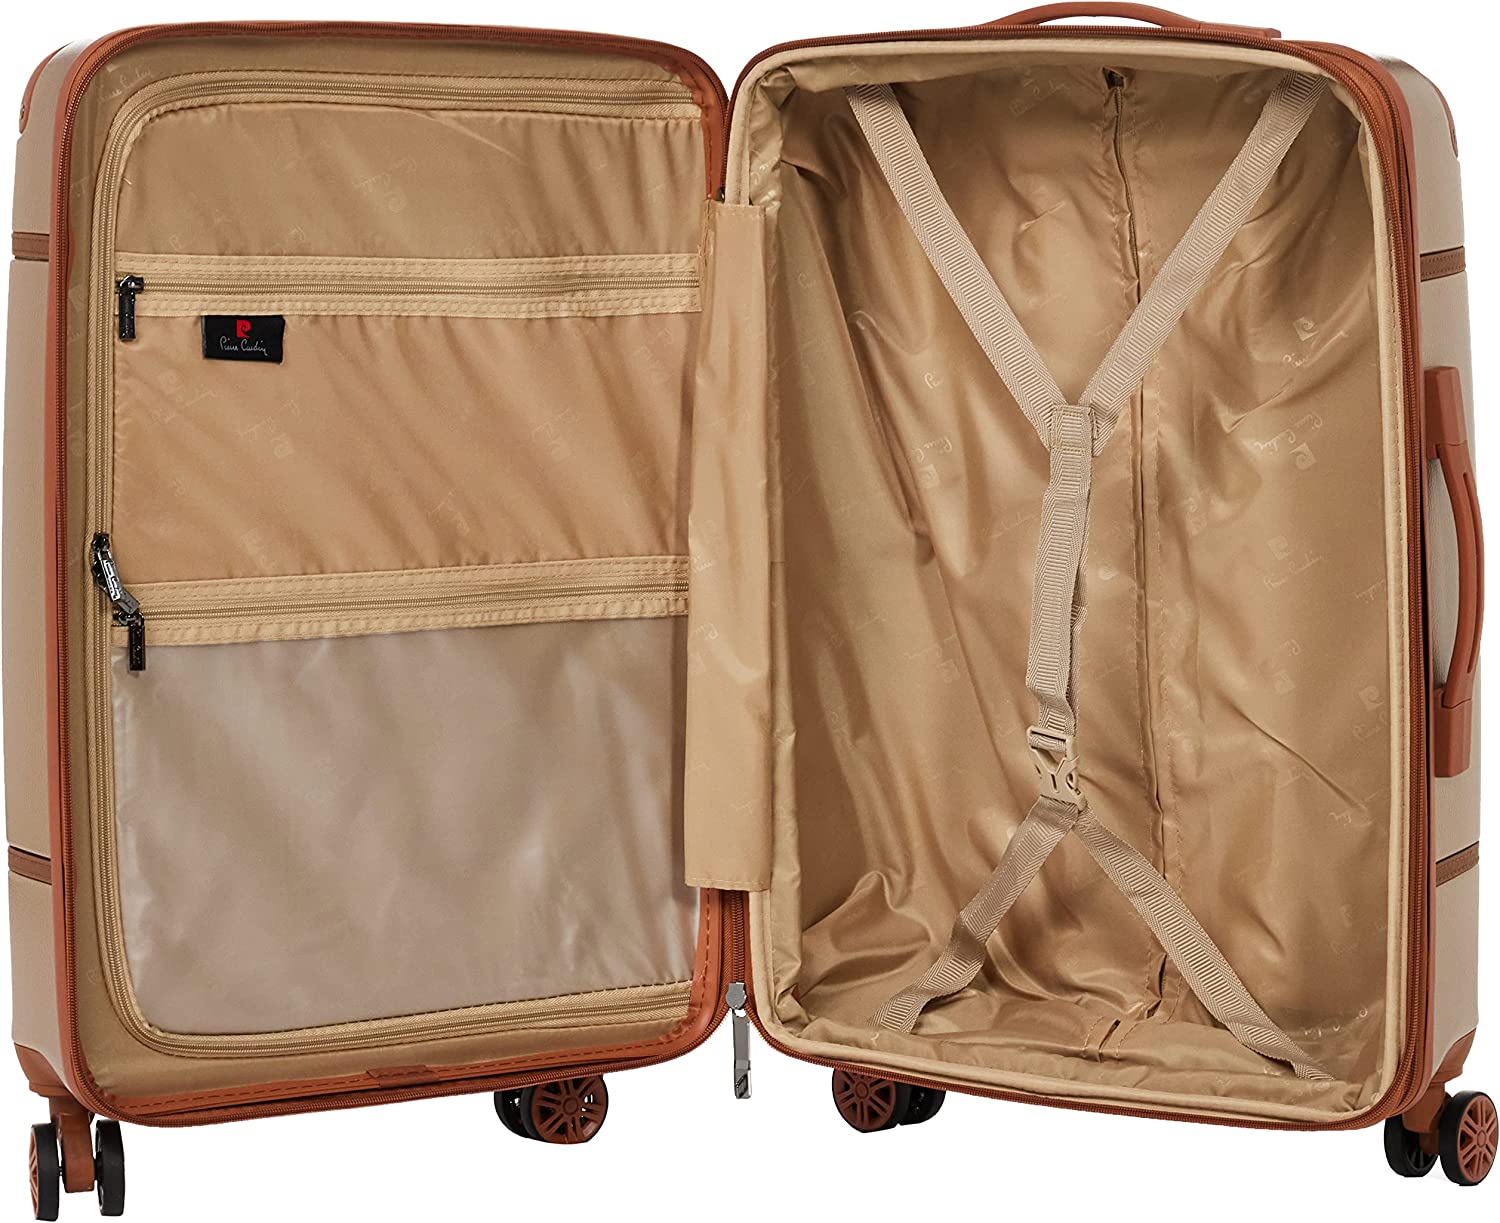 Pierre Cardin QUEBEC Hardcase Trolley Check In Large Champagne